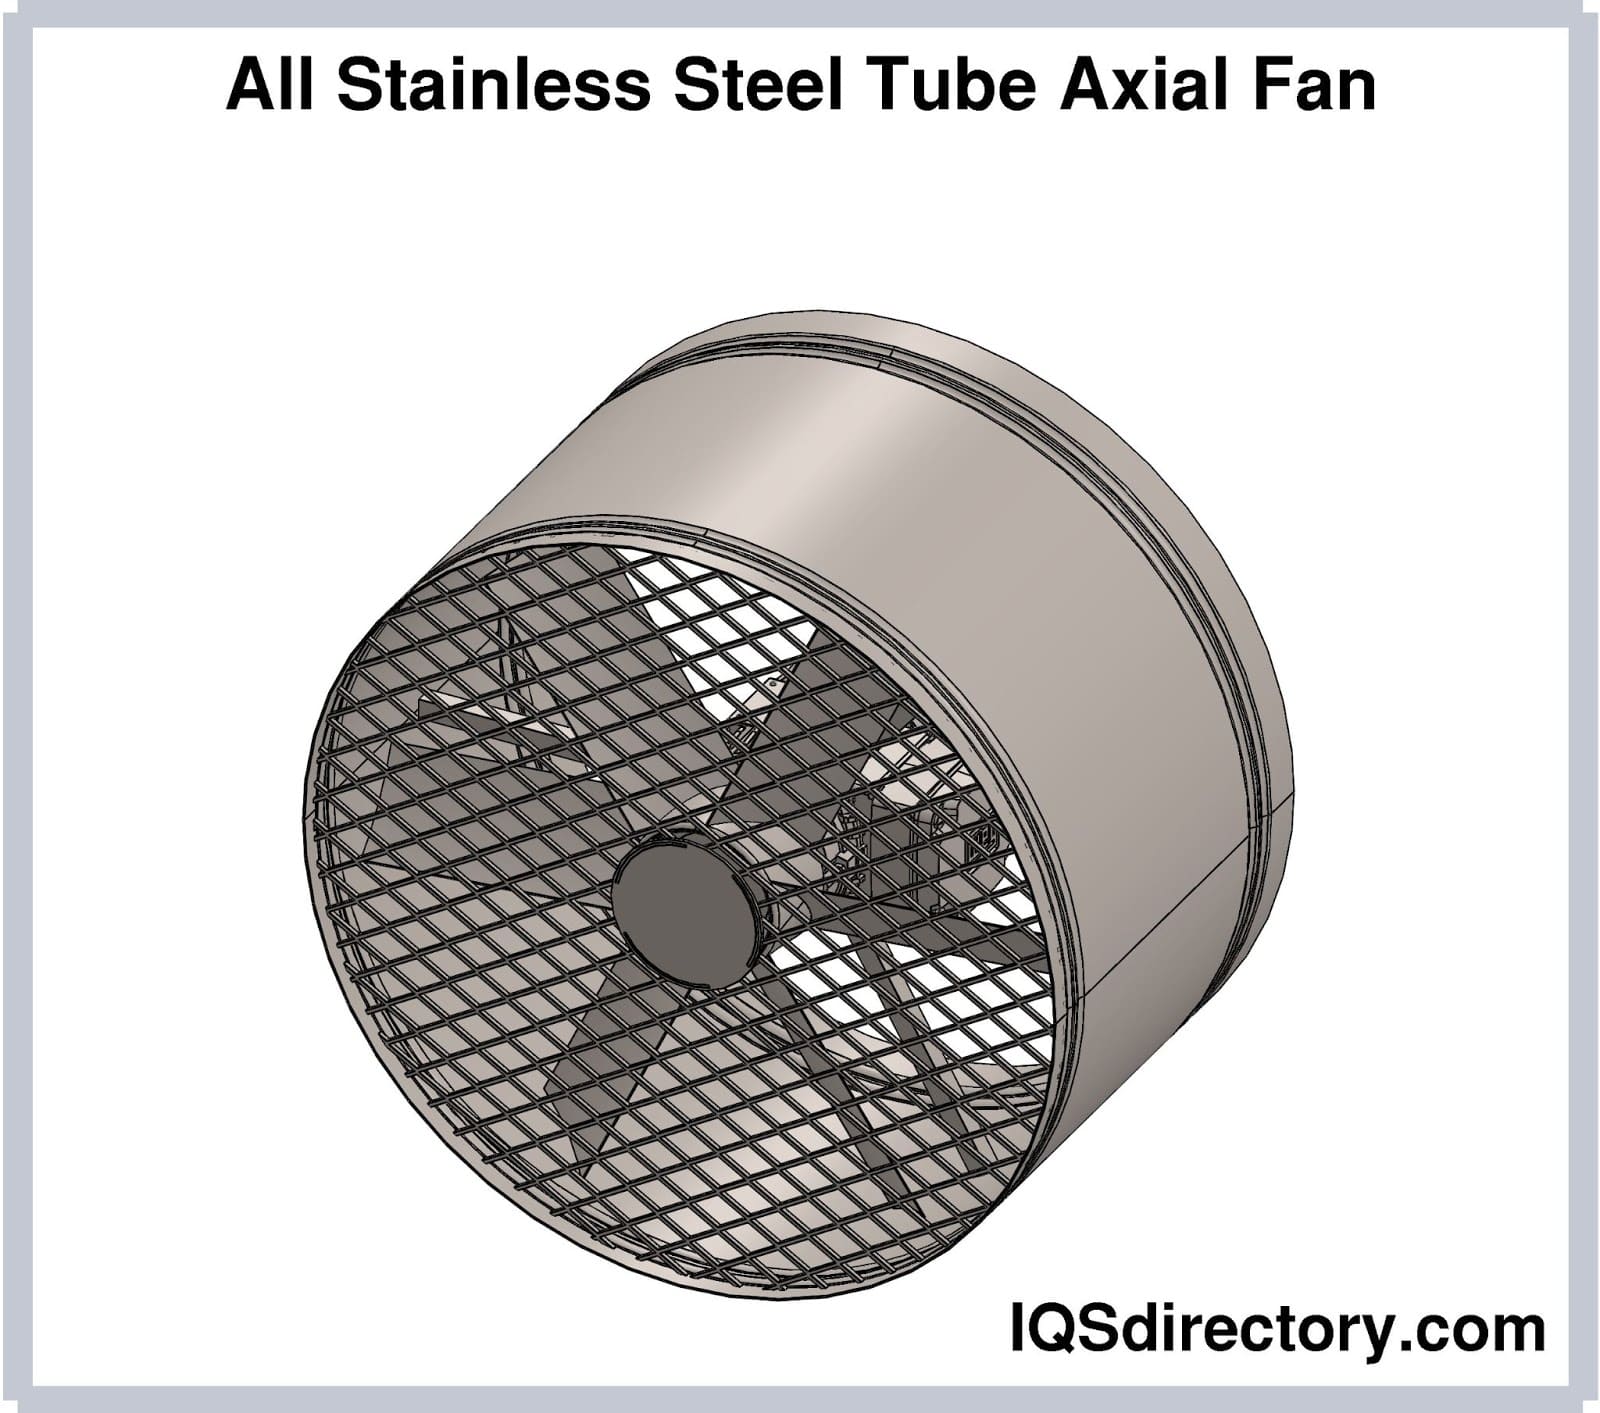 All Stainless Steel Tube Axial Fan